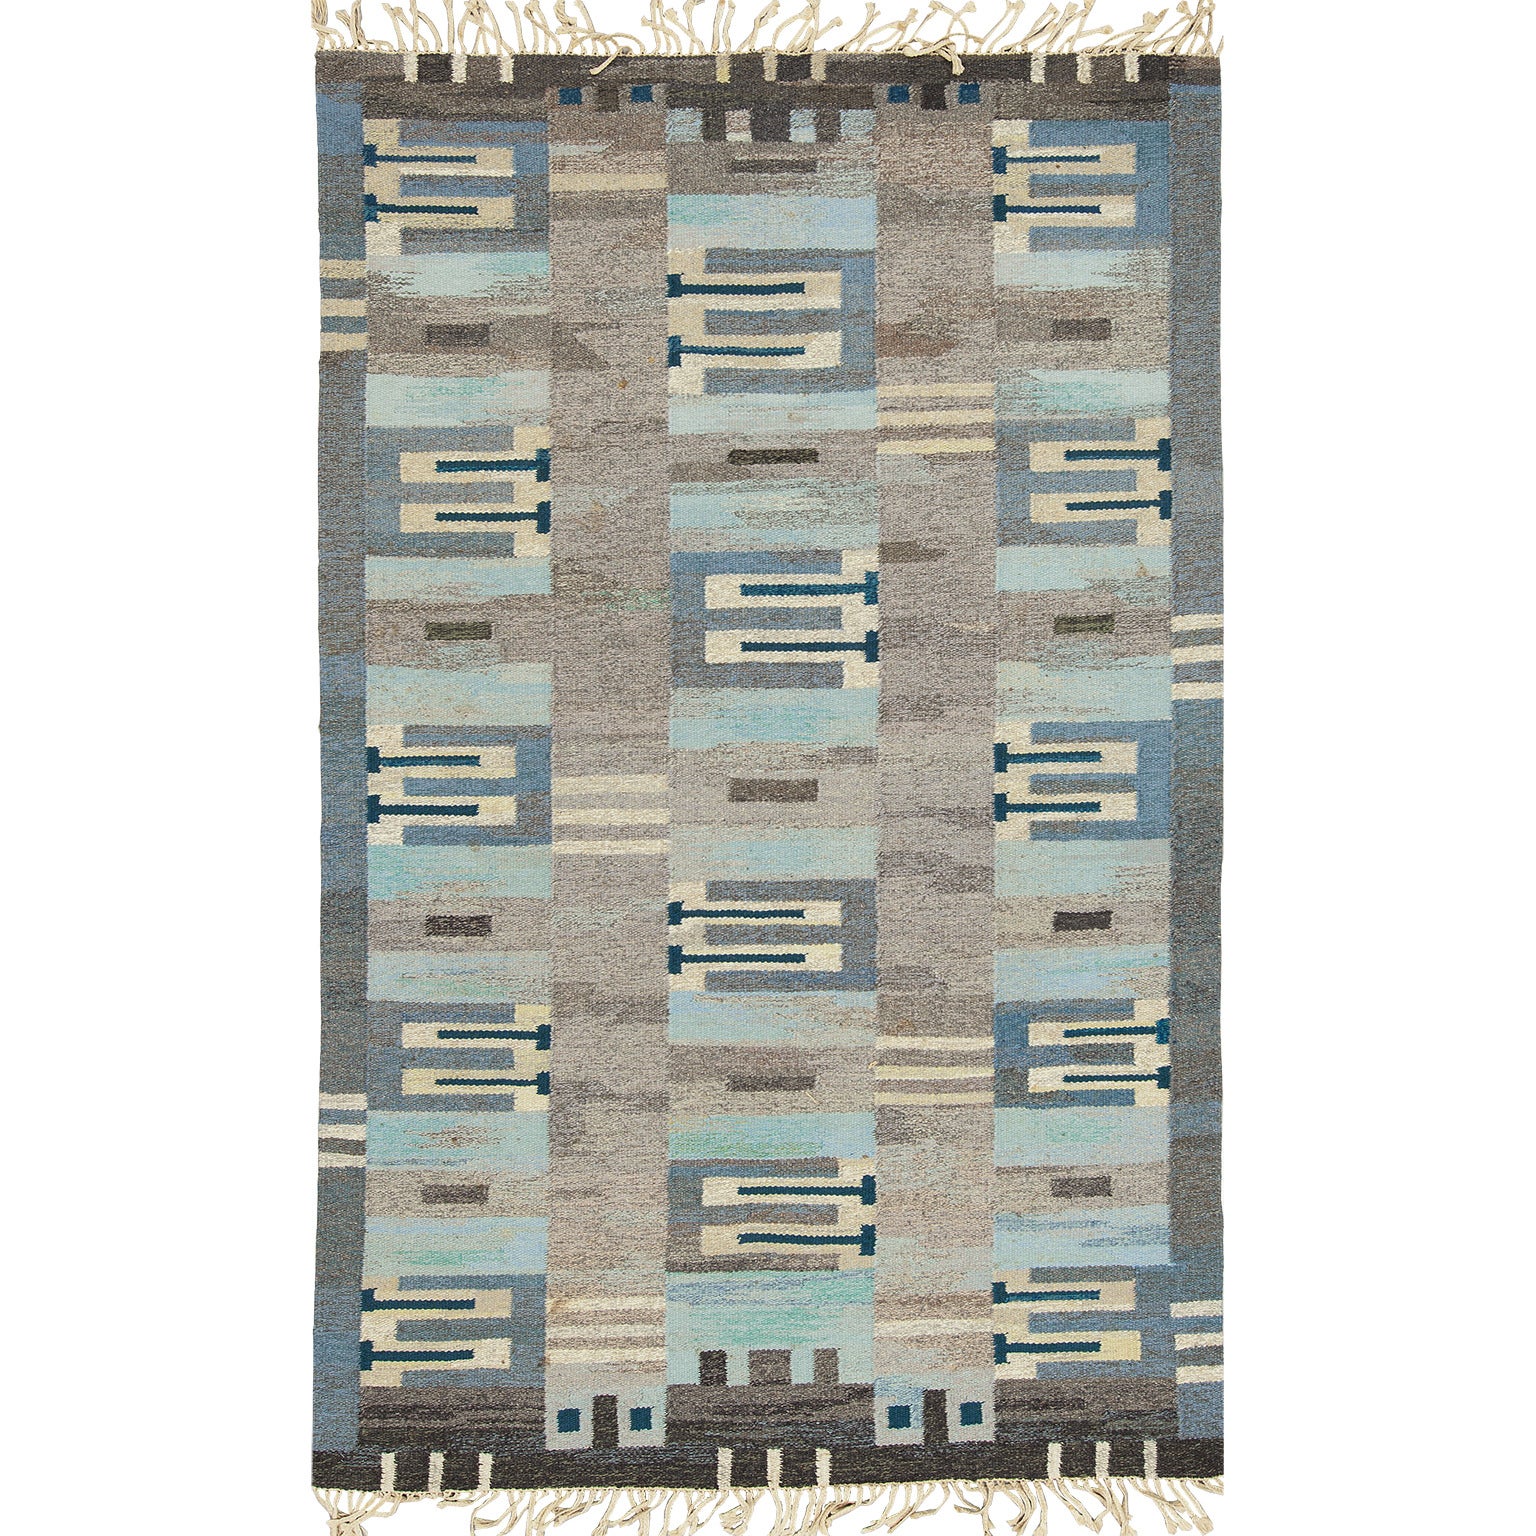 Swedish Art Deco Flat Weave "Rollakan" Rug with a Design in Grays and Blues